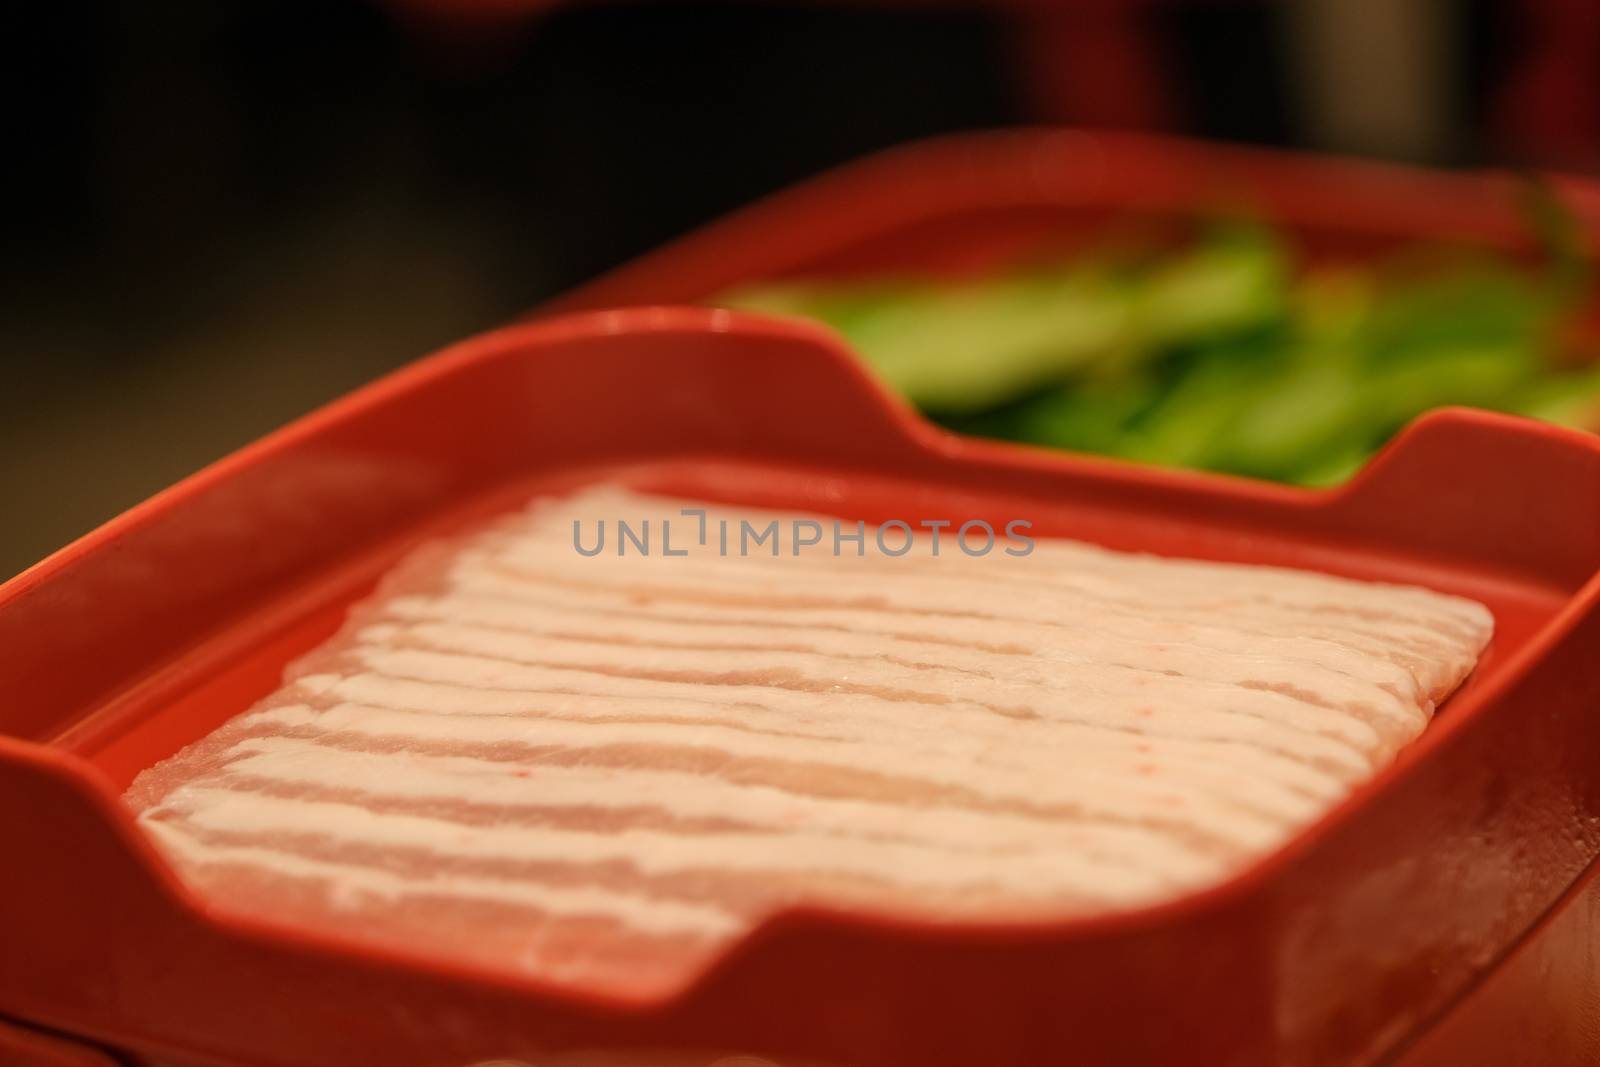 sliced raw pork meat isolated on a red plate background. Top view. by peerapixs